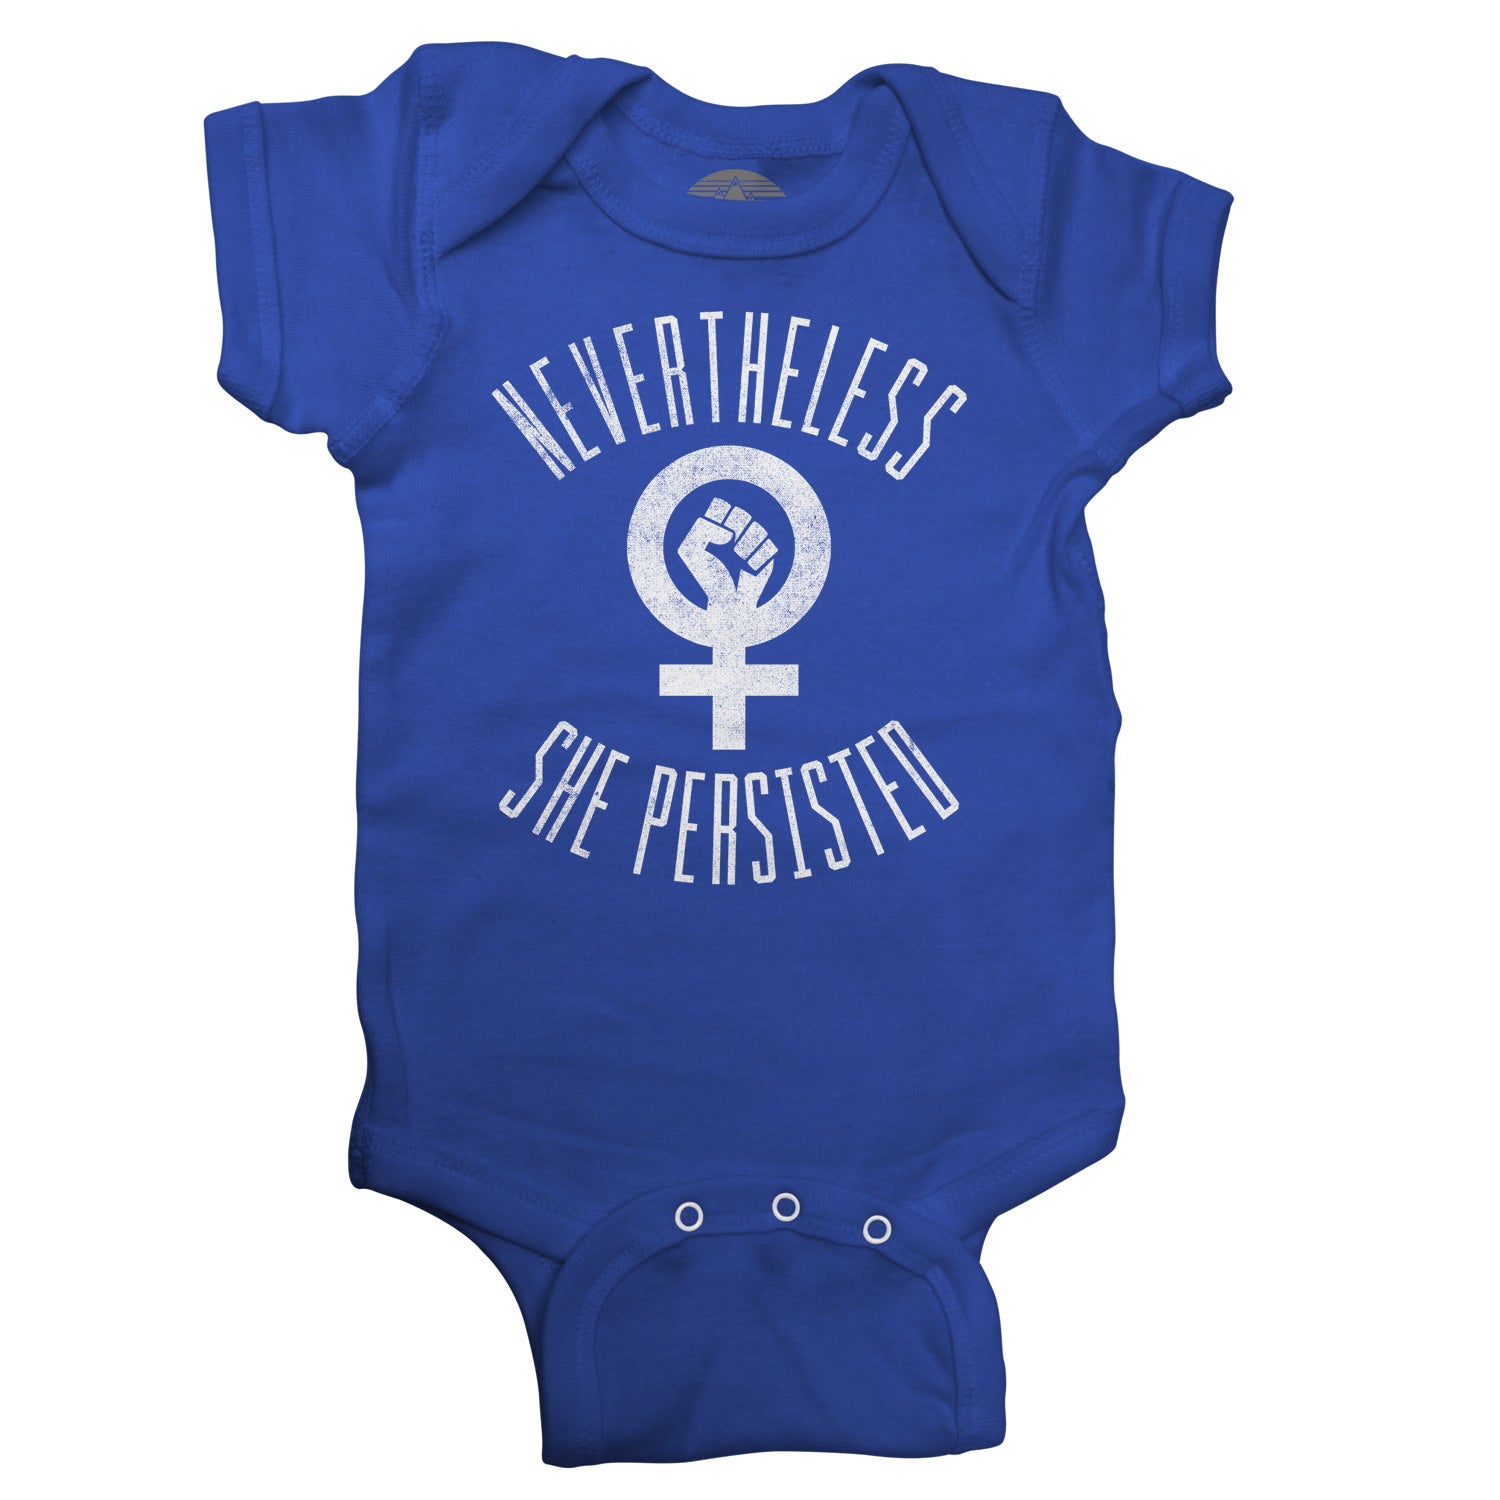 Nevertheless She Persisted Infant Bodysuit - Unisex Fit